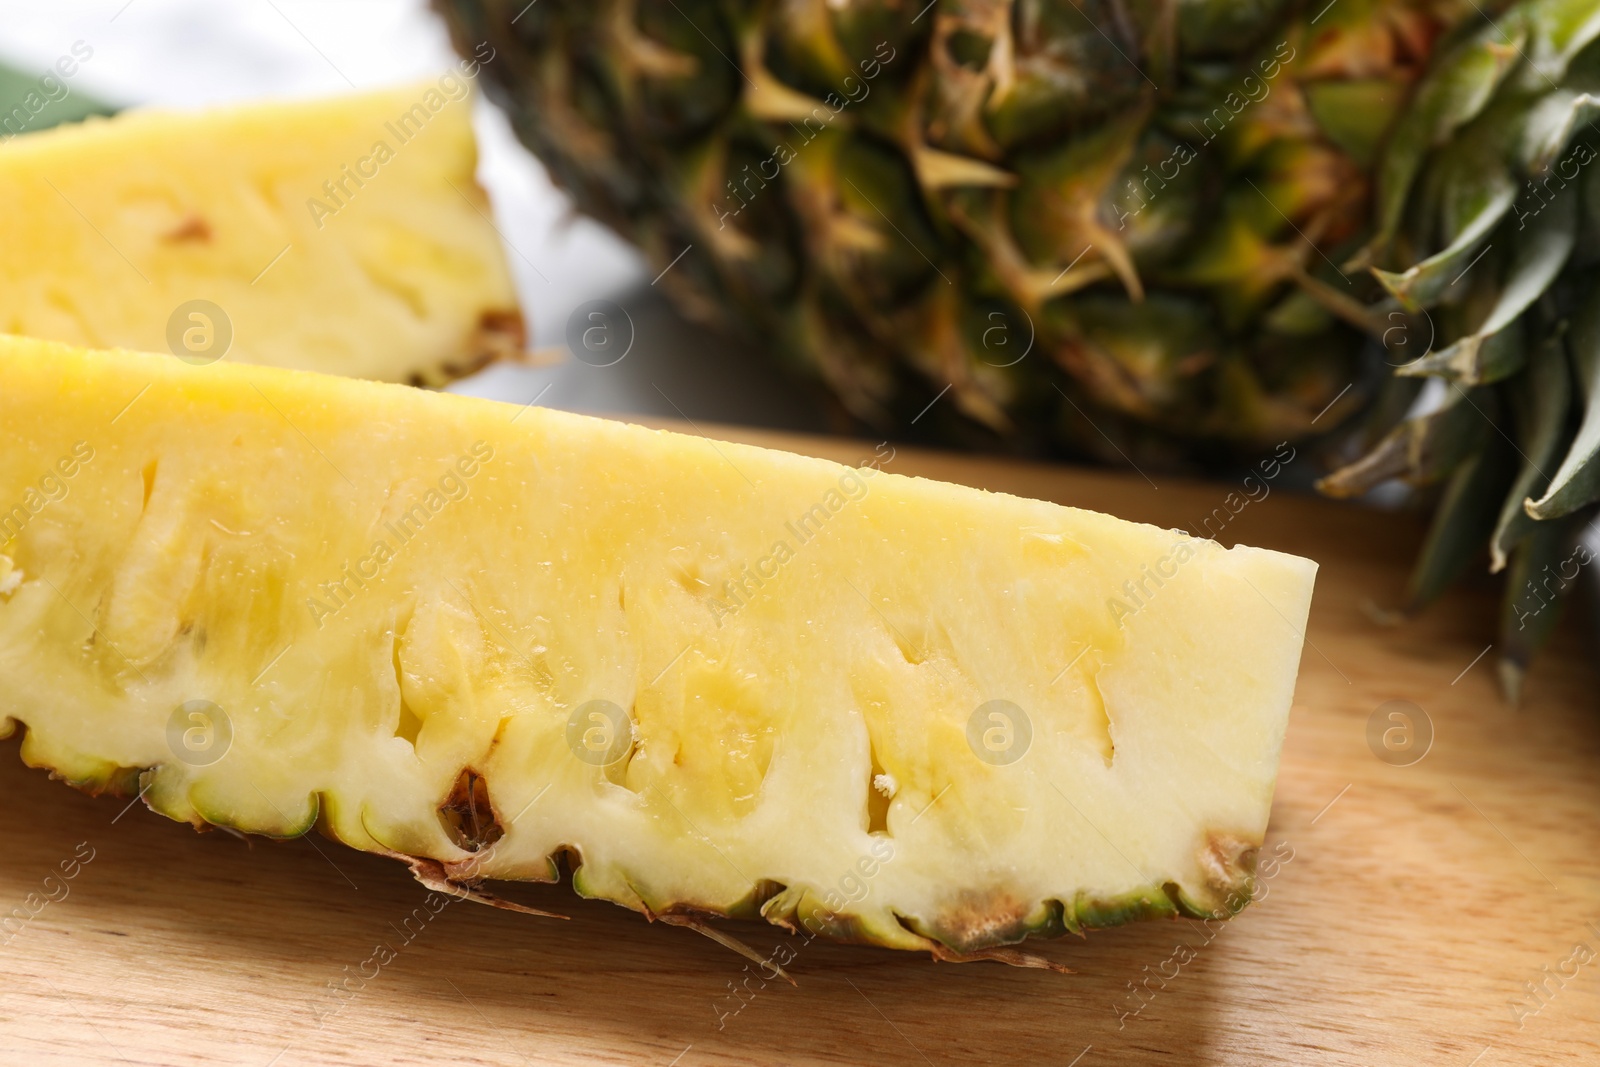 Photo of Wooden board with cut tasty ripe pineapple on table, closeup